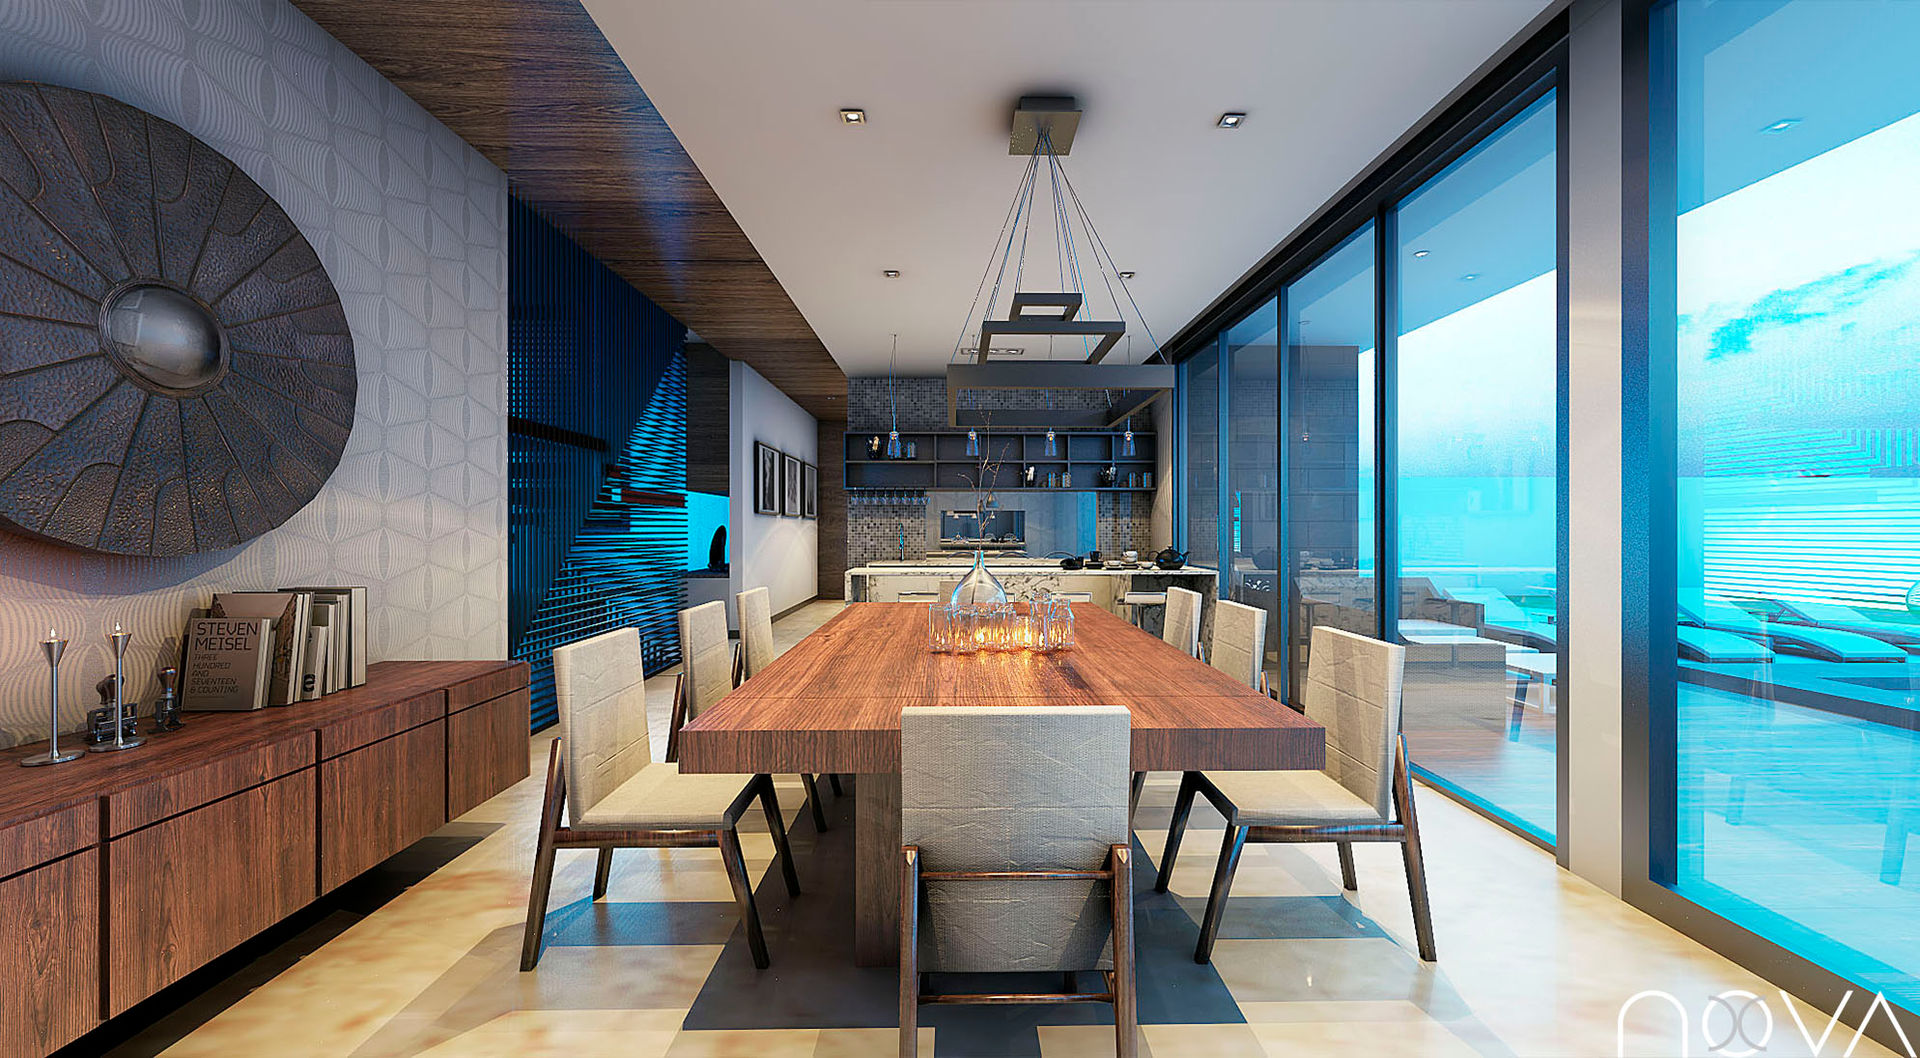 homify Modern dining room